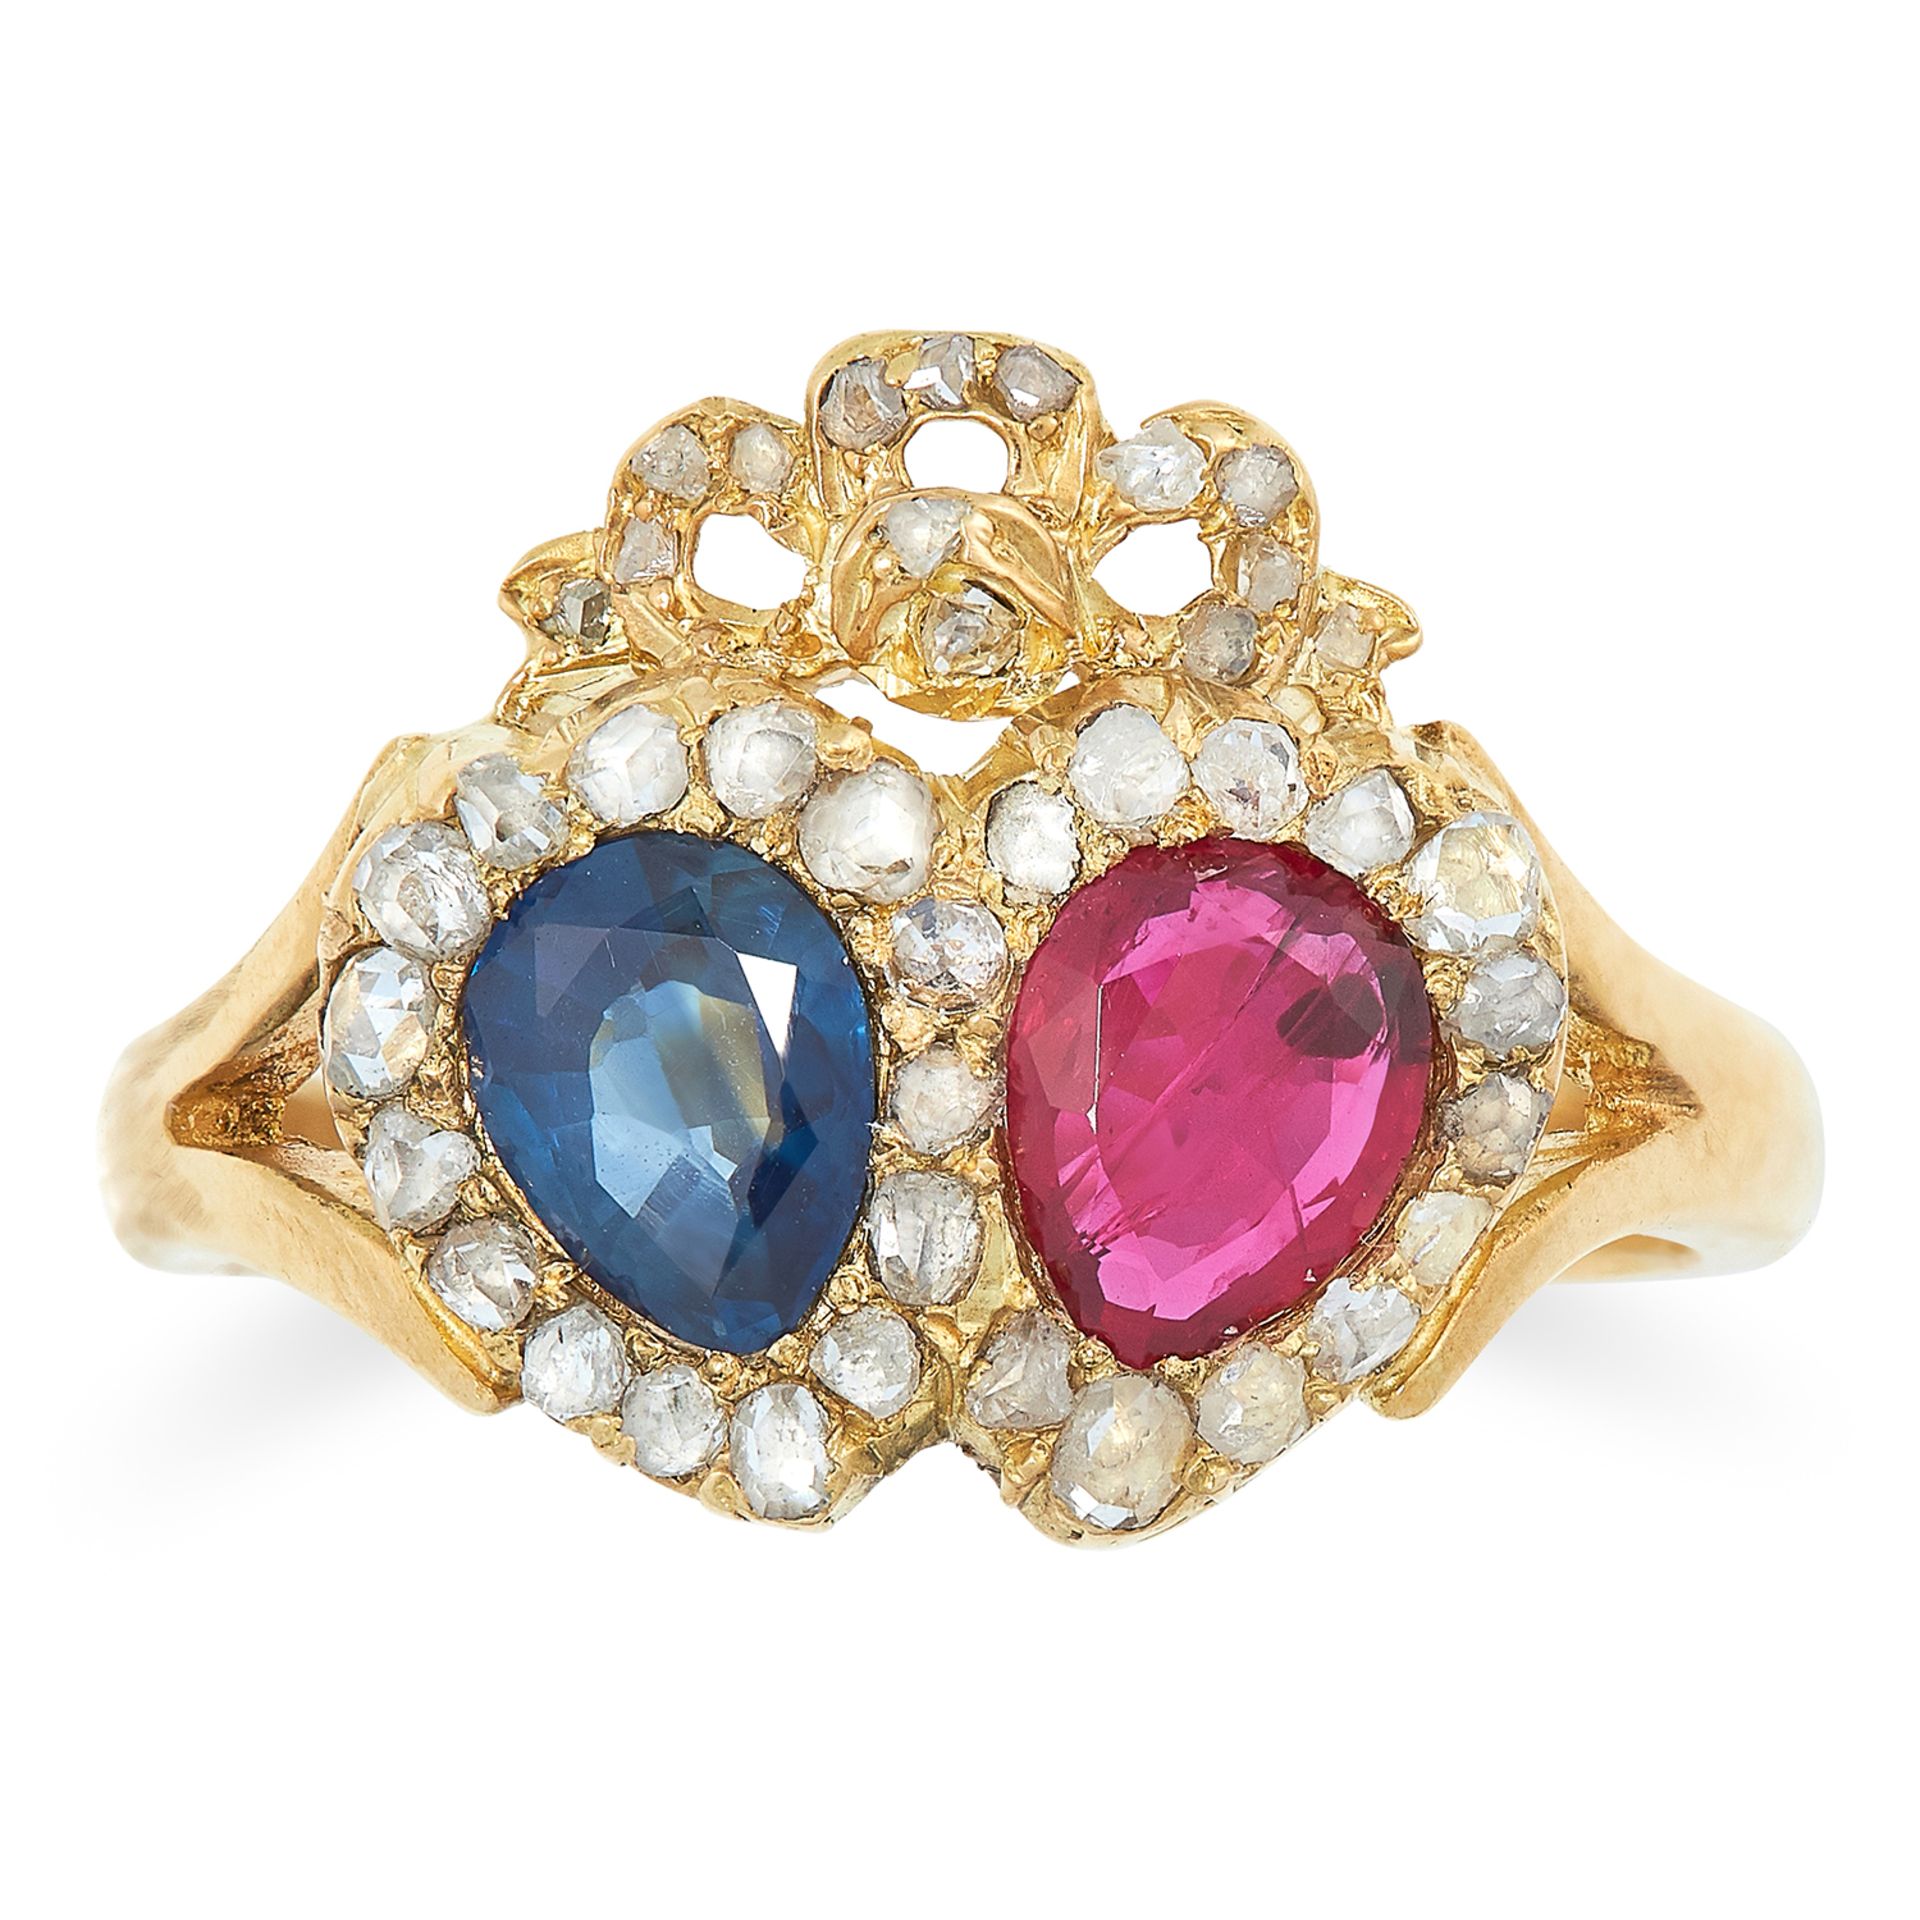 A RUBY AND SAPPHIRE SWEETHEART RING set with a pear cut ruby and a pear cut sapphire and rose cut